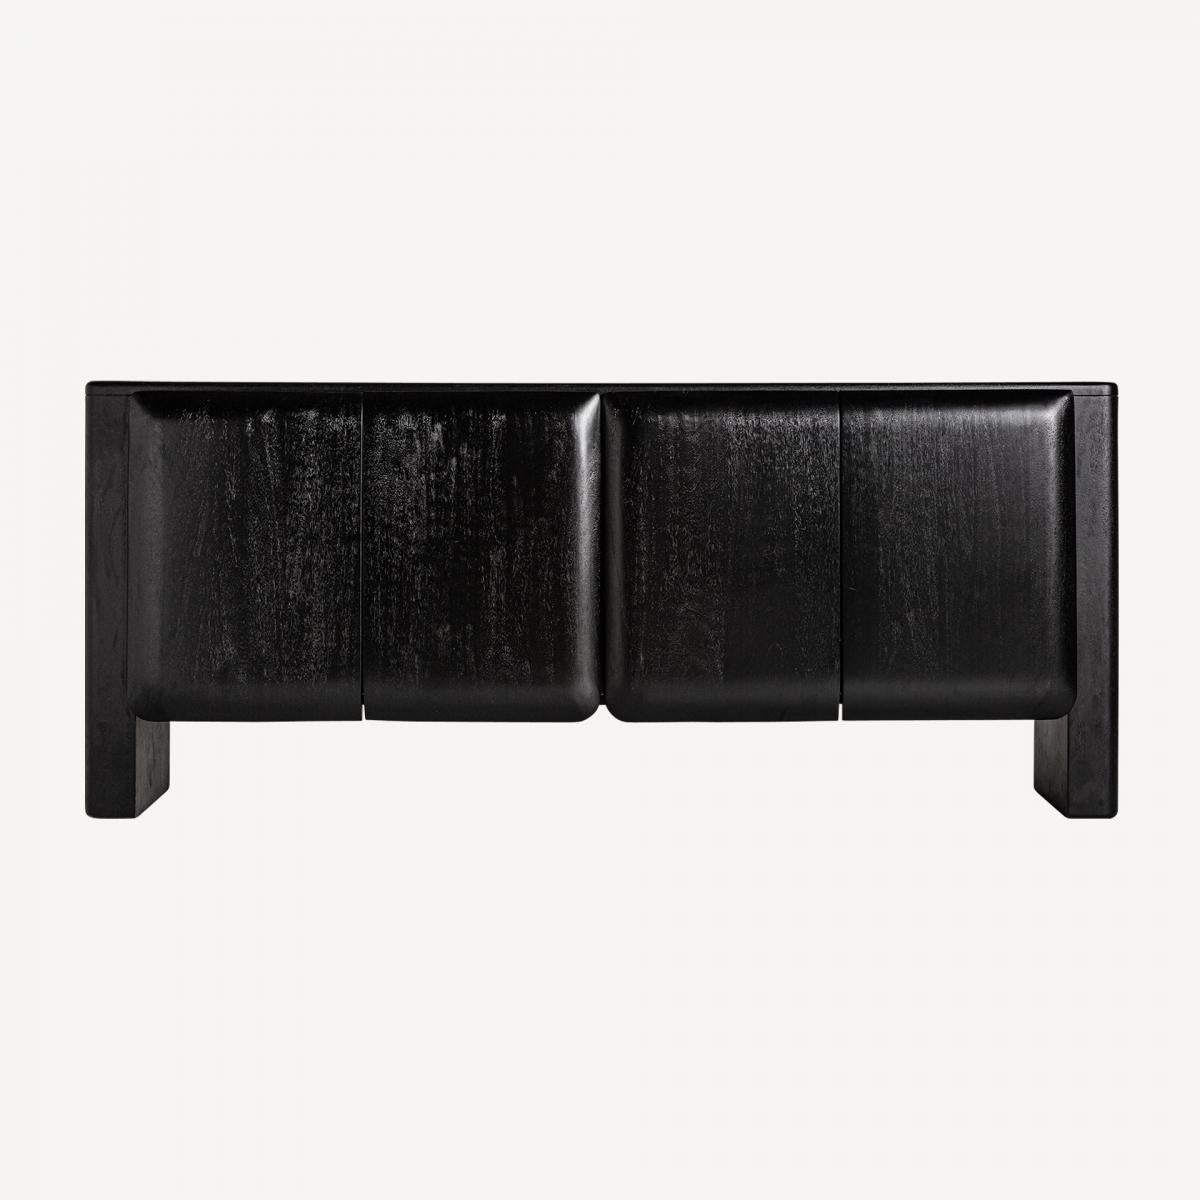 The contemporary and minimalist design of this mango wood sideboard buffet in a sleek black finish epitomizes understated elegance. Its minimalist aesthetic is characterized by clean lines and a focus on simplicity, allowing the natural beauty of